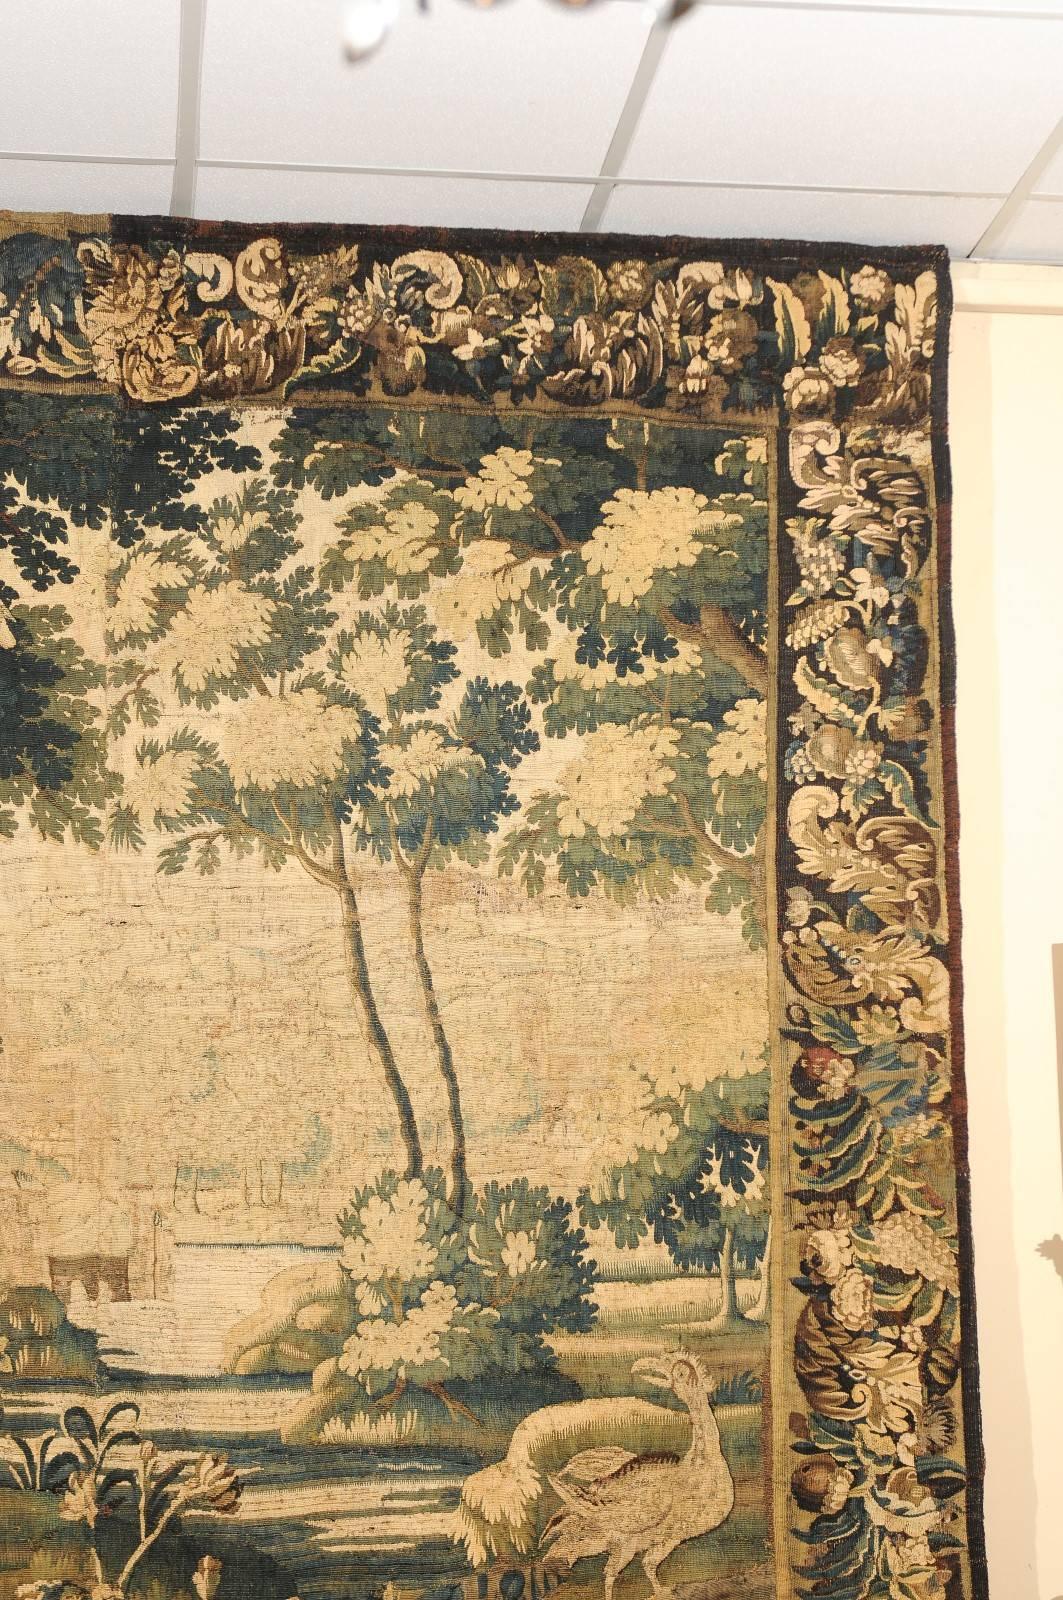 Hand-Woven 18th Century French Aubusson Tapestry